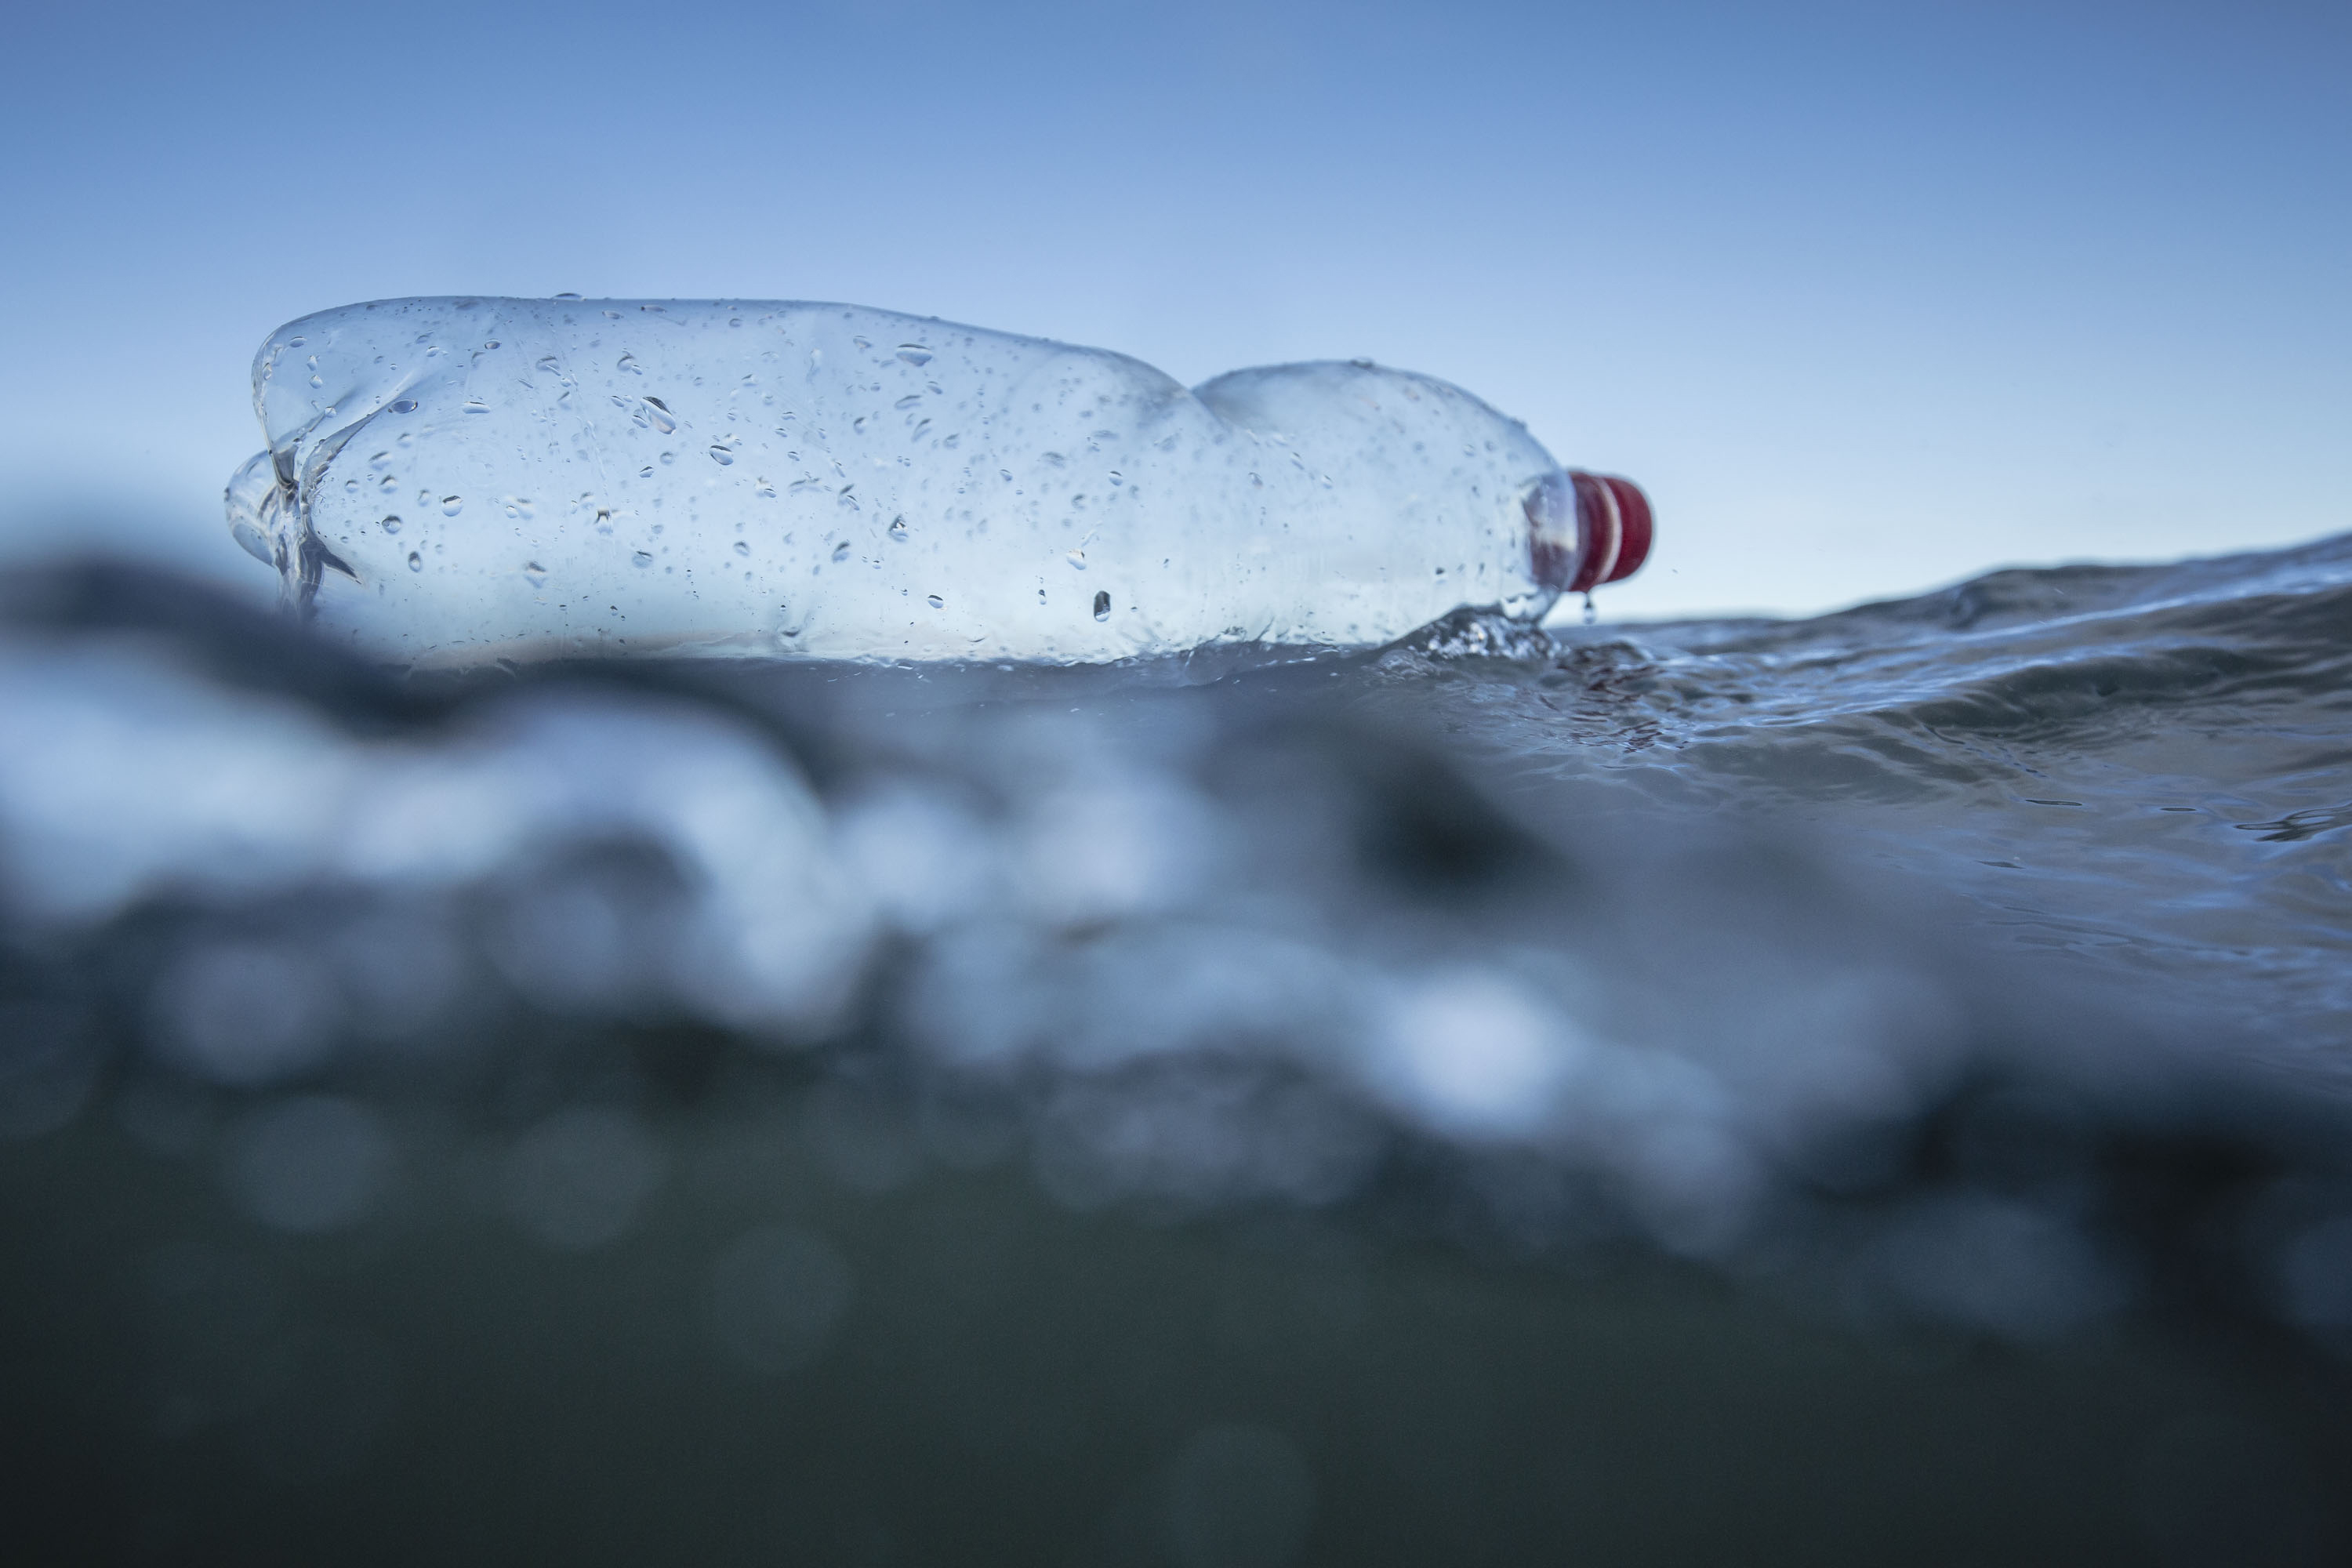 How does plastic end up in the ocean? | Greenpeace UK